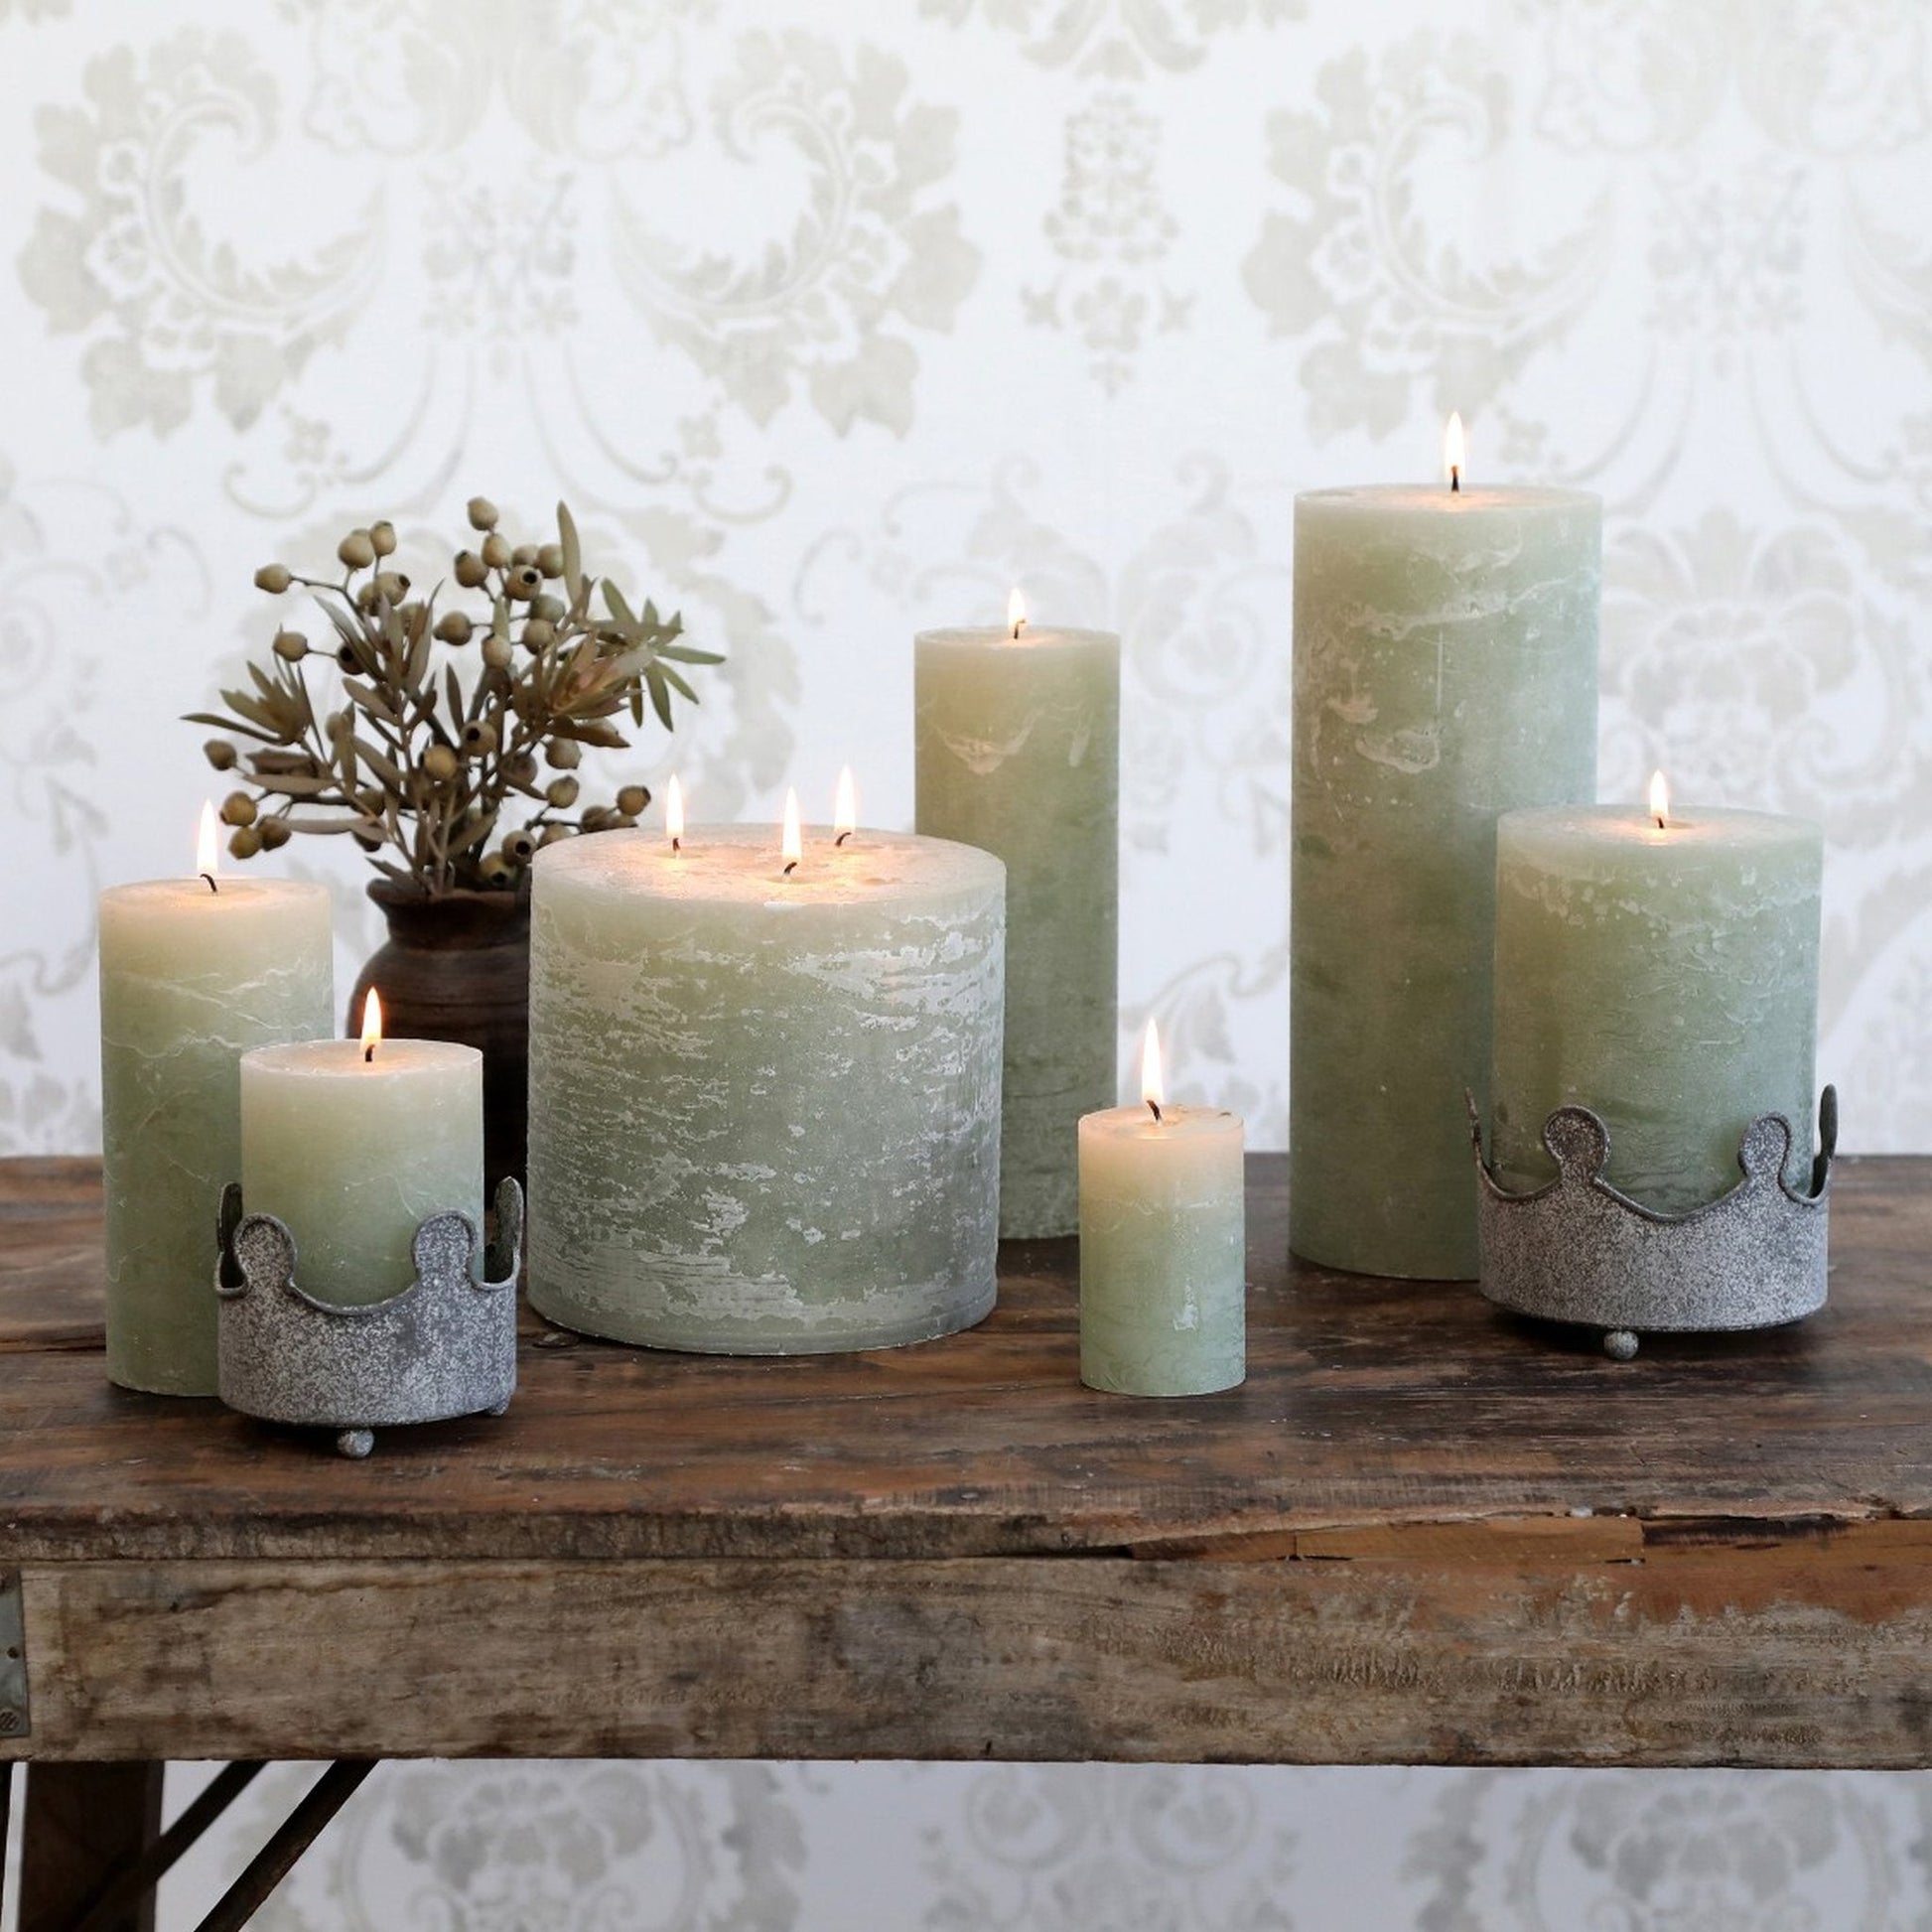 Verte Rustic Pillar Candle 16 hours - Bumble Living